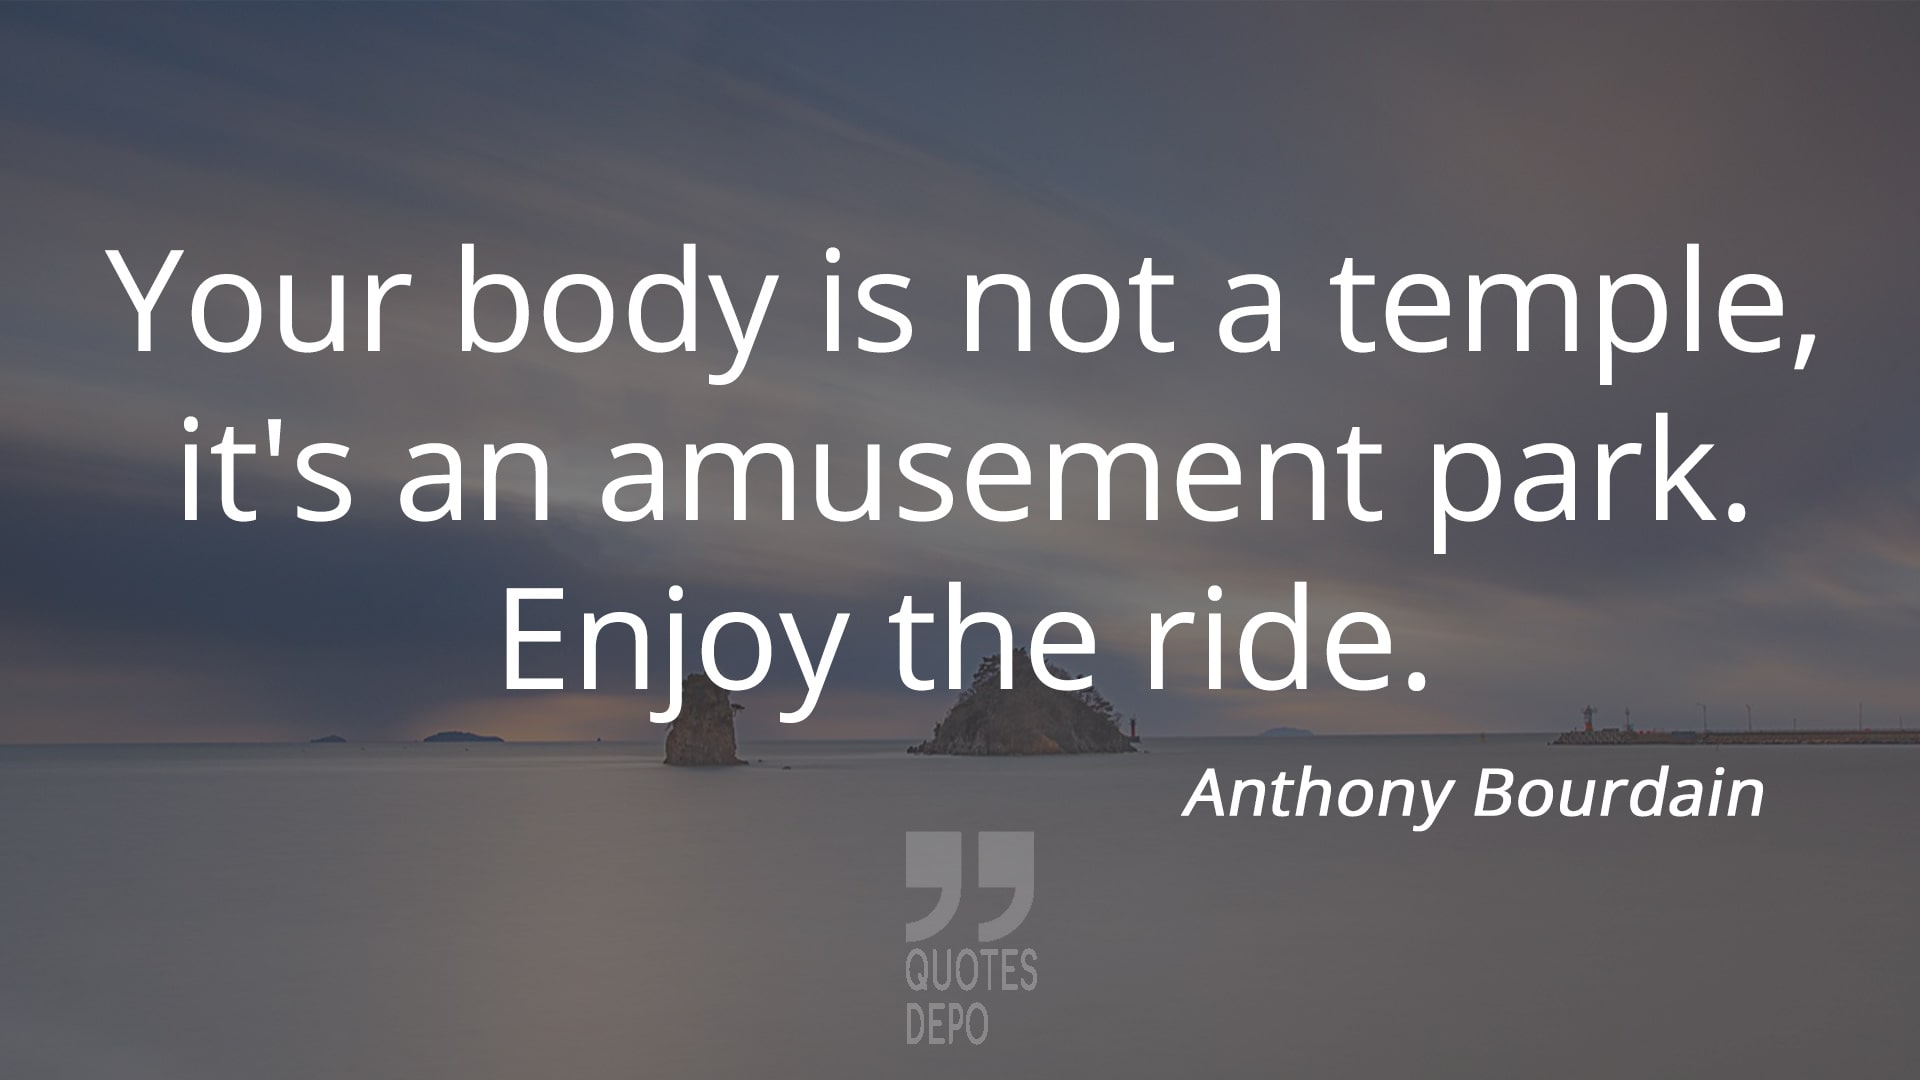 your body is not a temple - anthony bourdain quotes